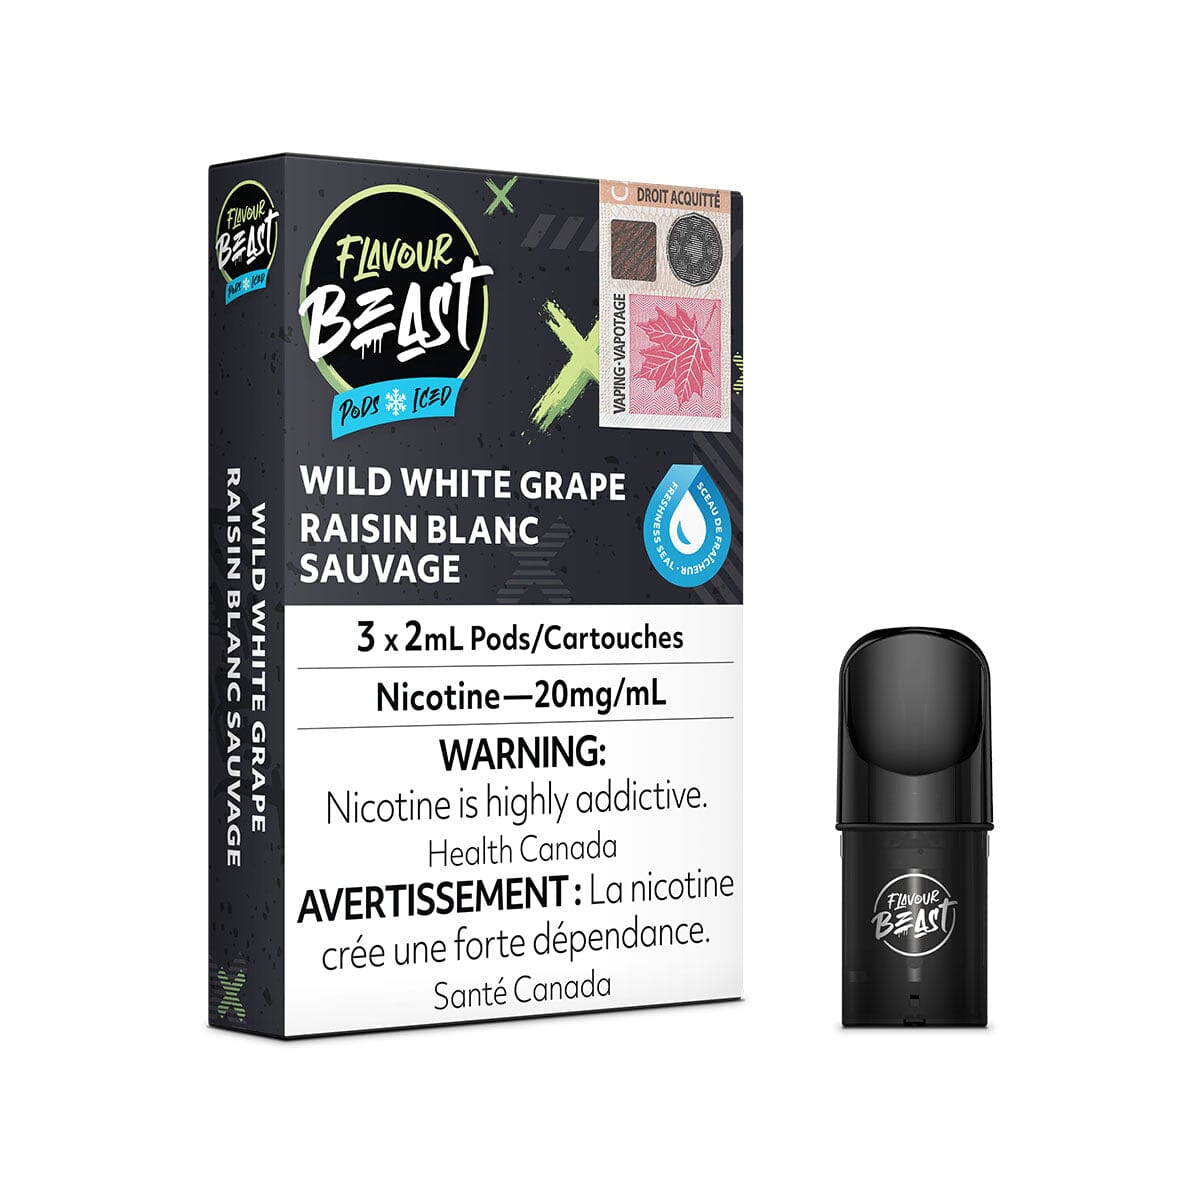 STLTH Compatible Flavour Beast Wild White Grape Iced Vape Pods Pre-filled Pod Flavour Beast 